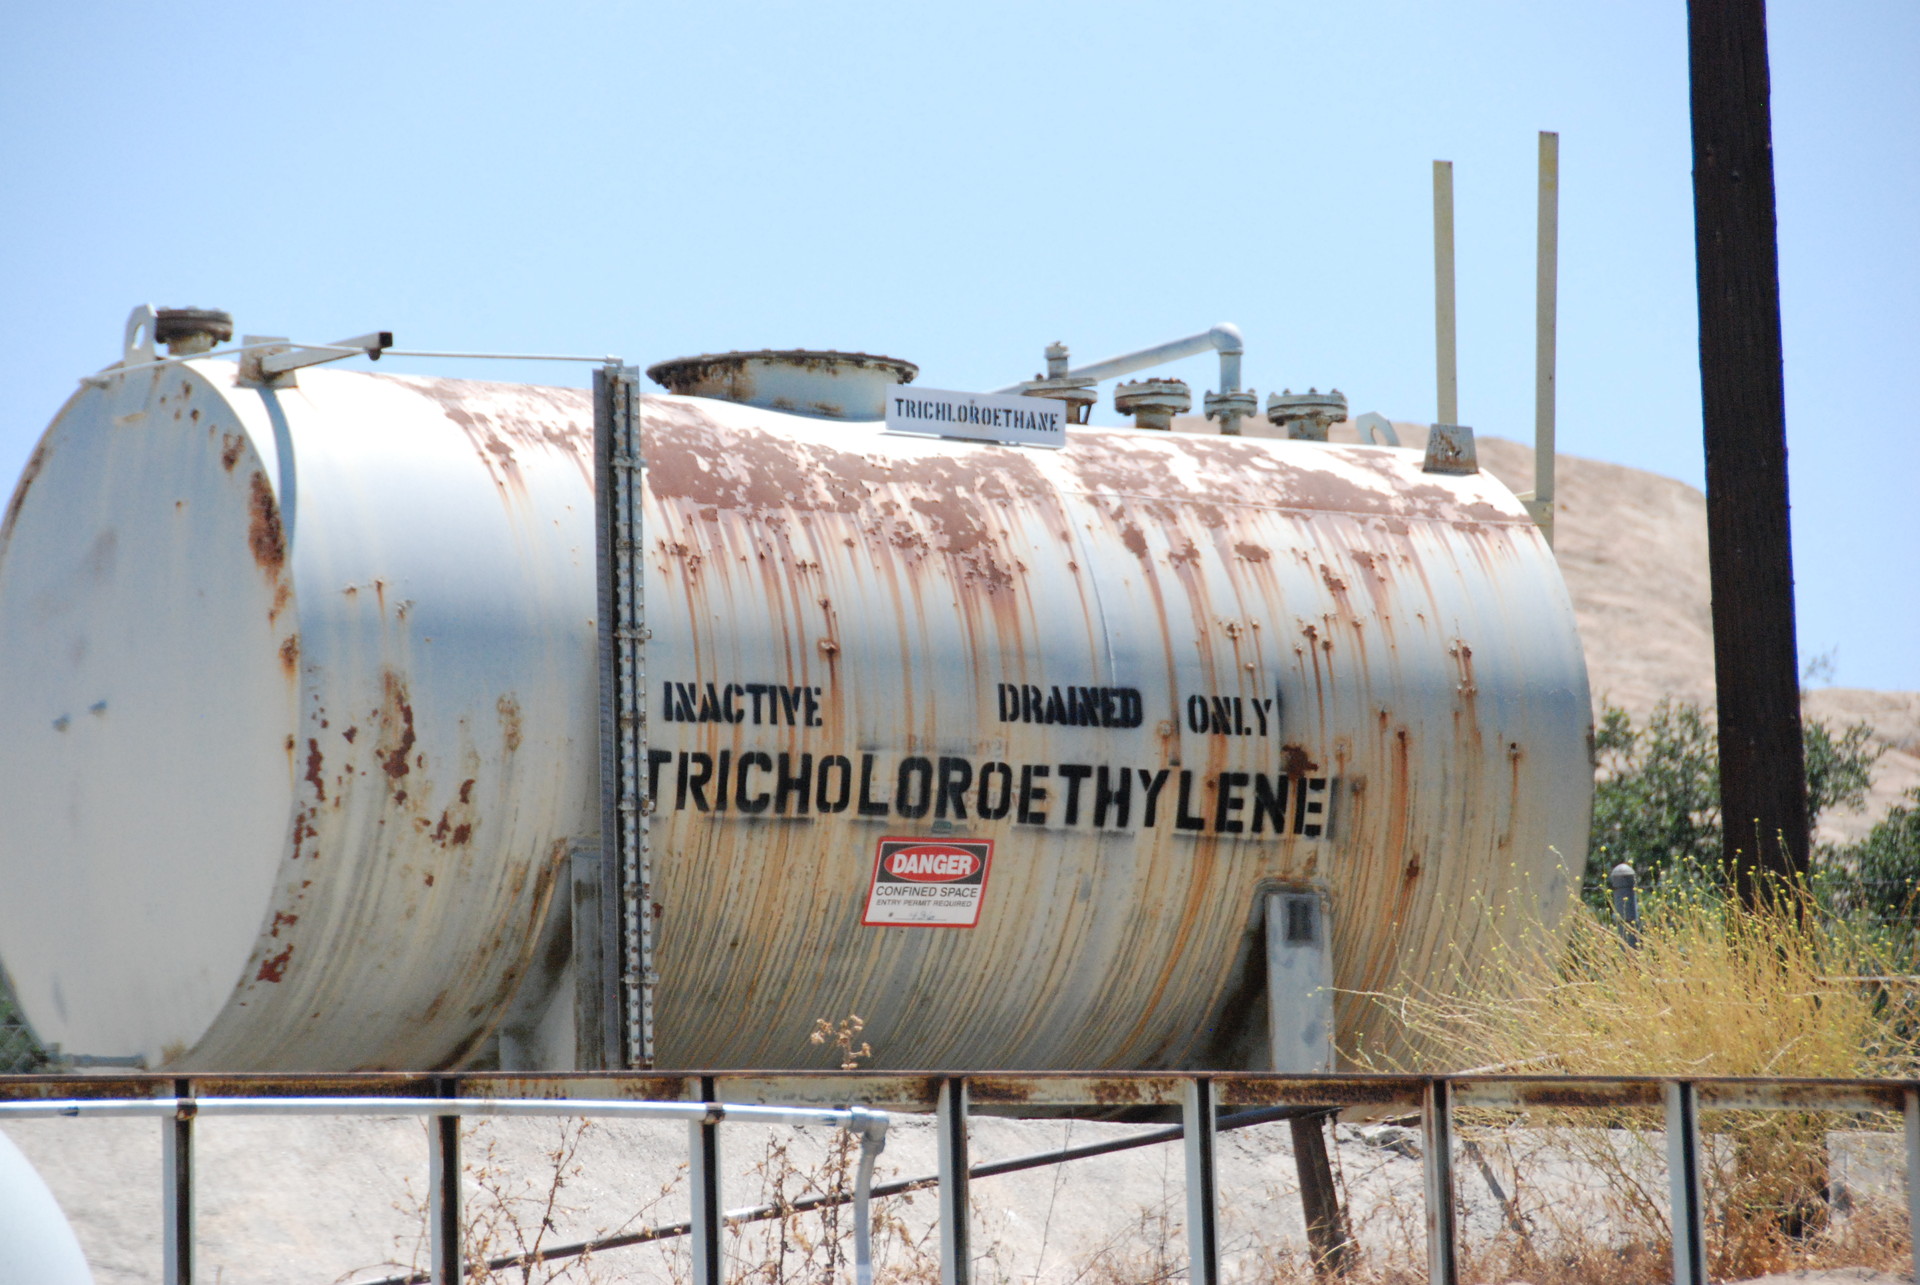 NASA used trichloroethylene, a carcinogen, as a degreaser on its rocket test stands, then poured it into unlined storage ponds. An estimated half-million gallons of trichloroethylene have contaminated the ground beneath Santa Susana.